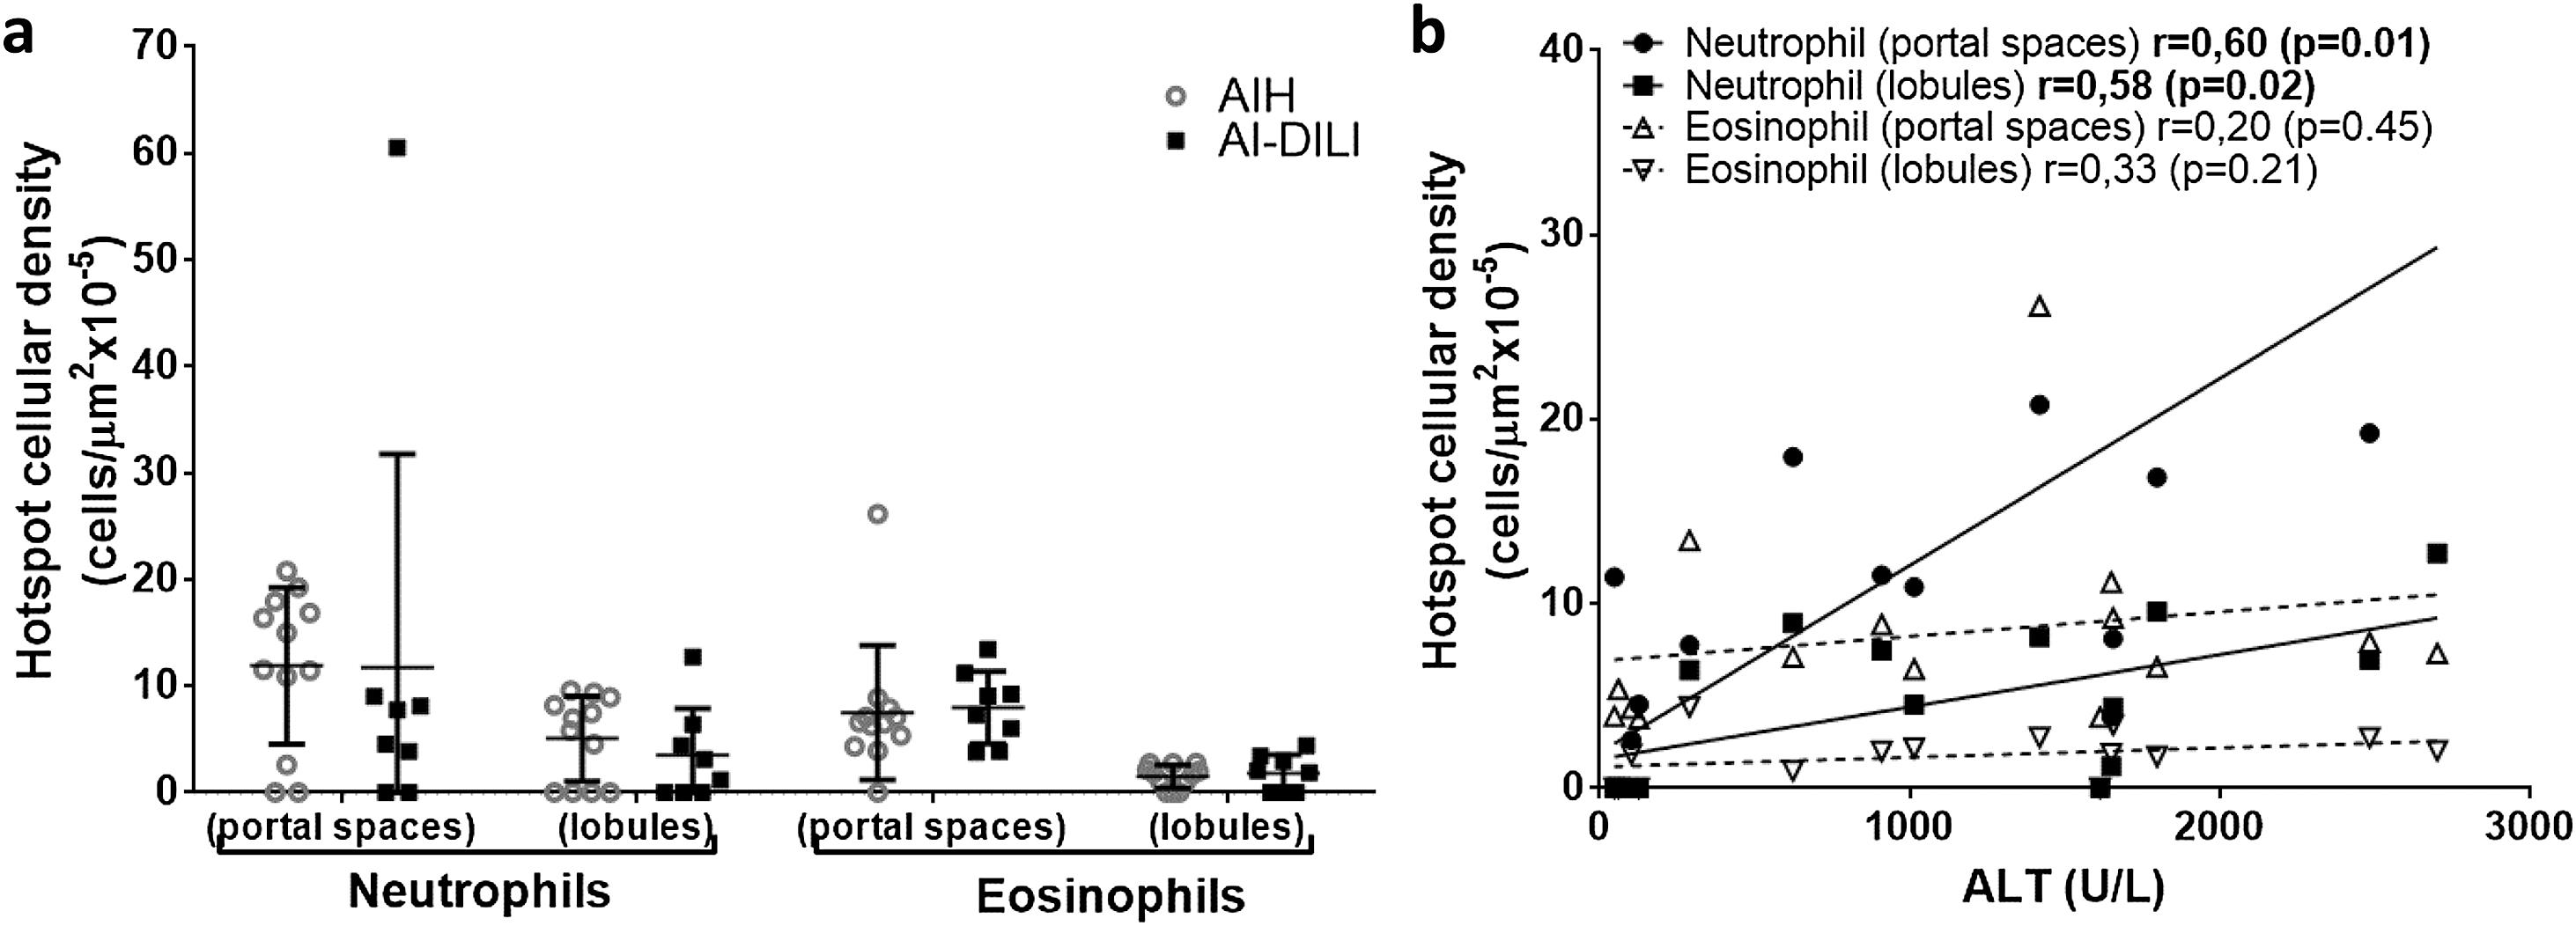 Cellular densities and distribution of neutrophils and eosinophils in AIH versus AI-DILI.